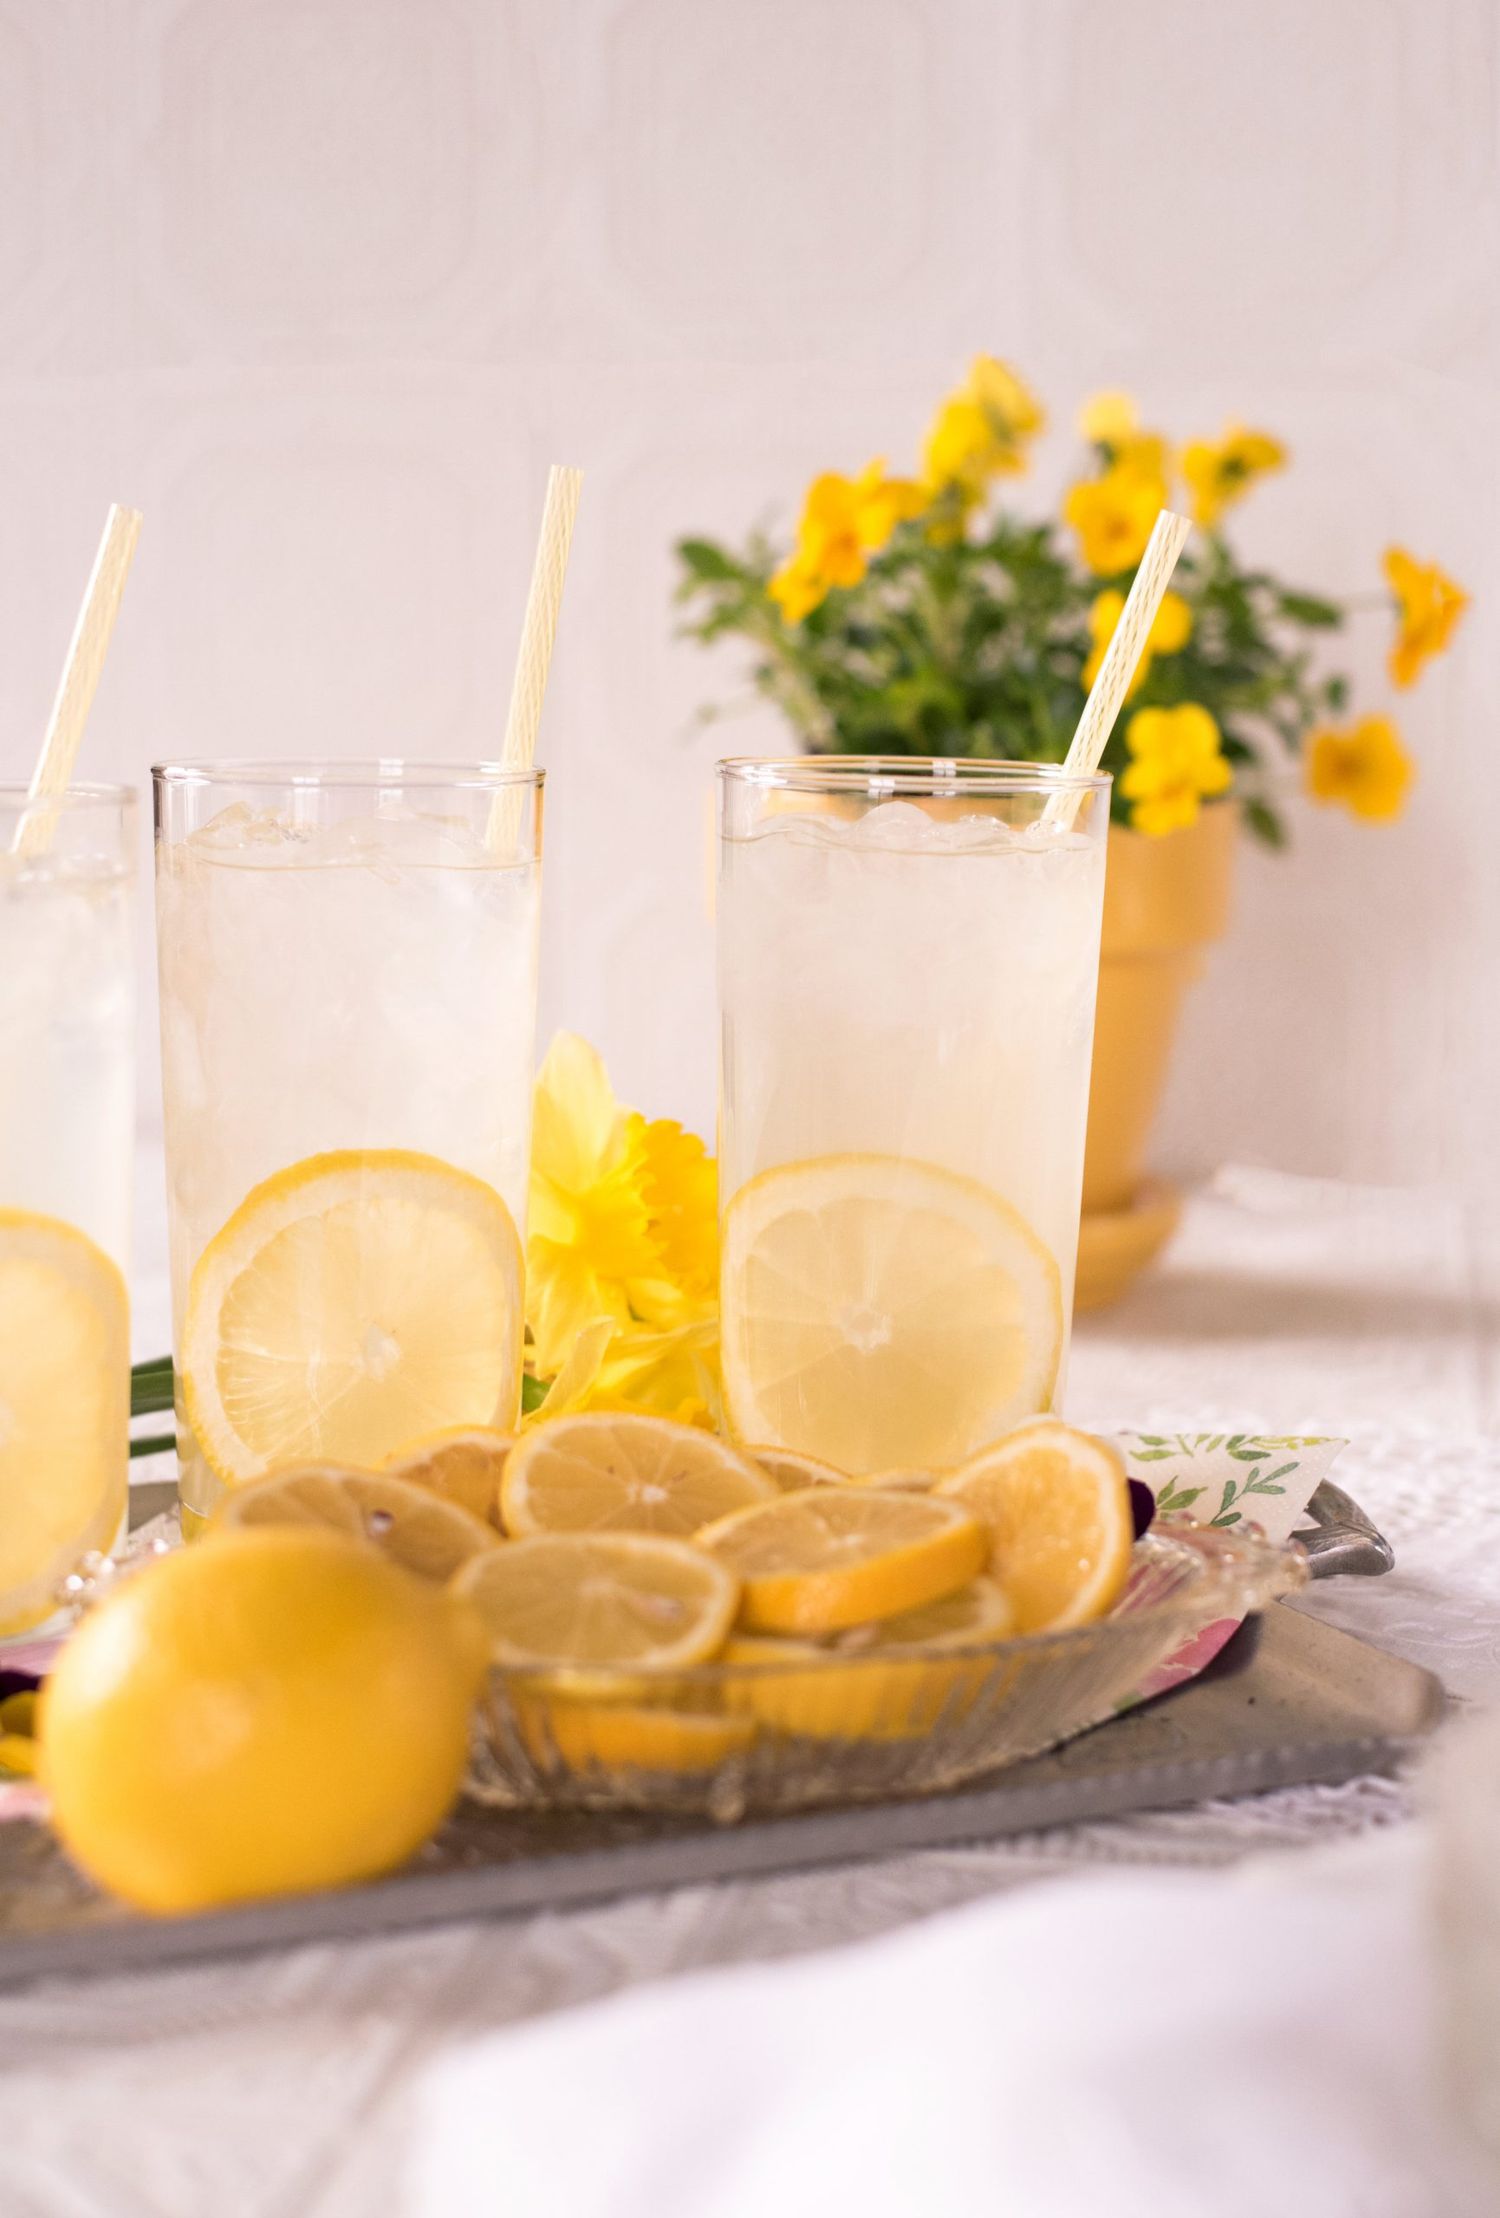 Lemonade or Lemons? – Depends on What You Actually Need…